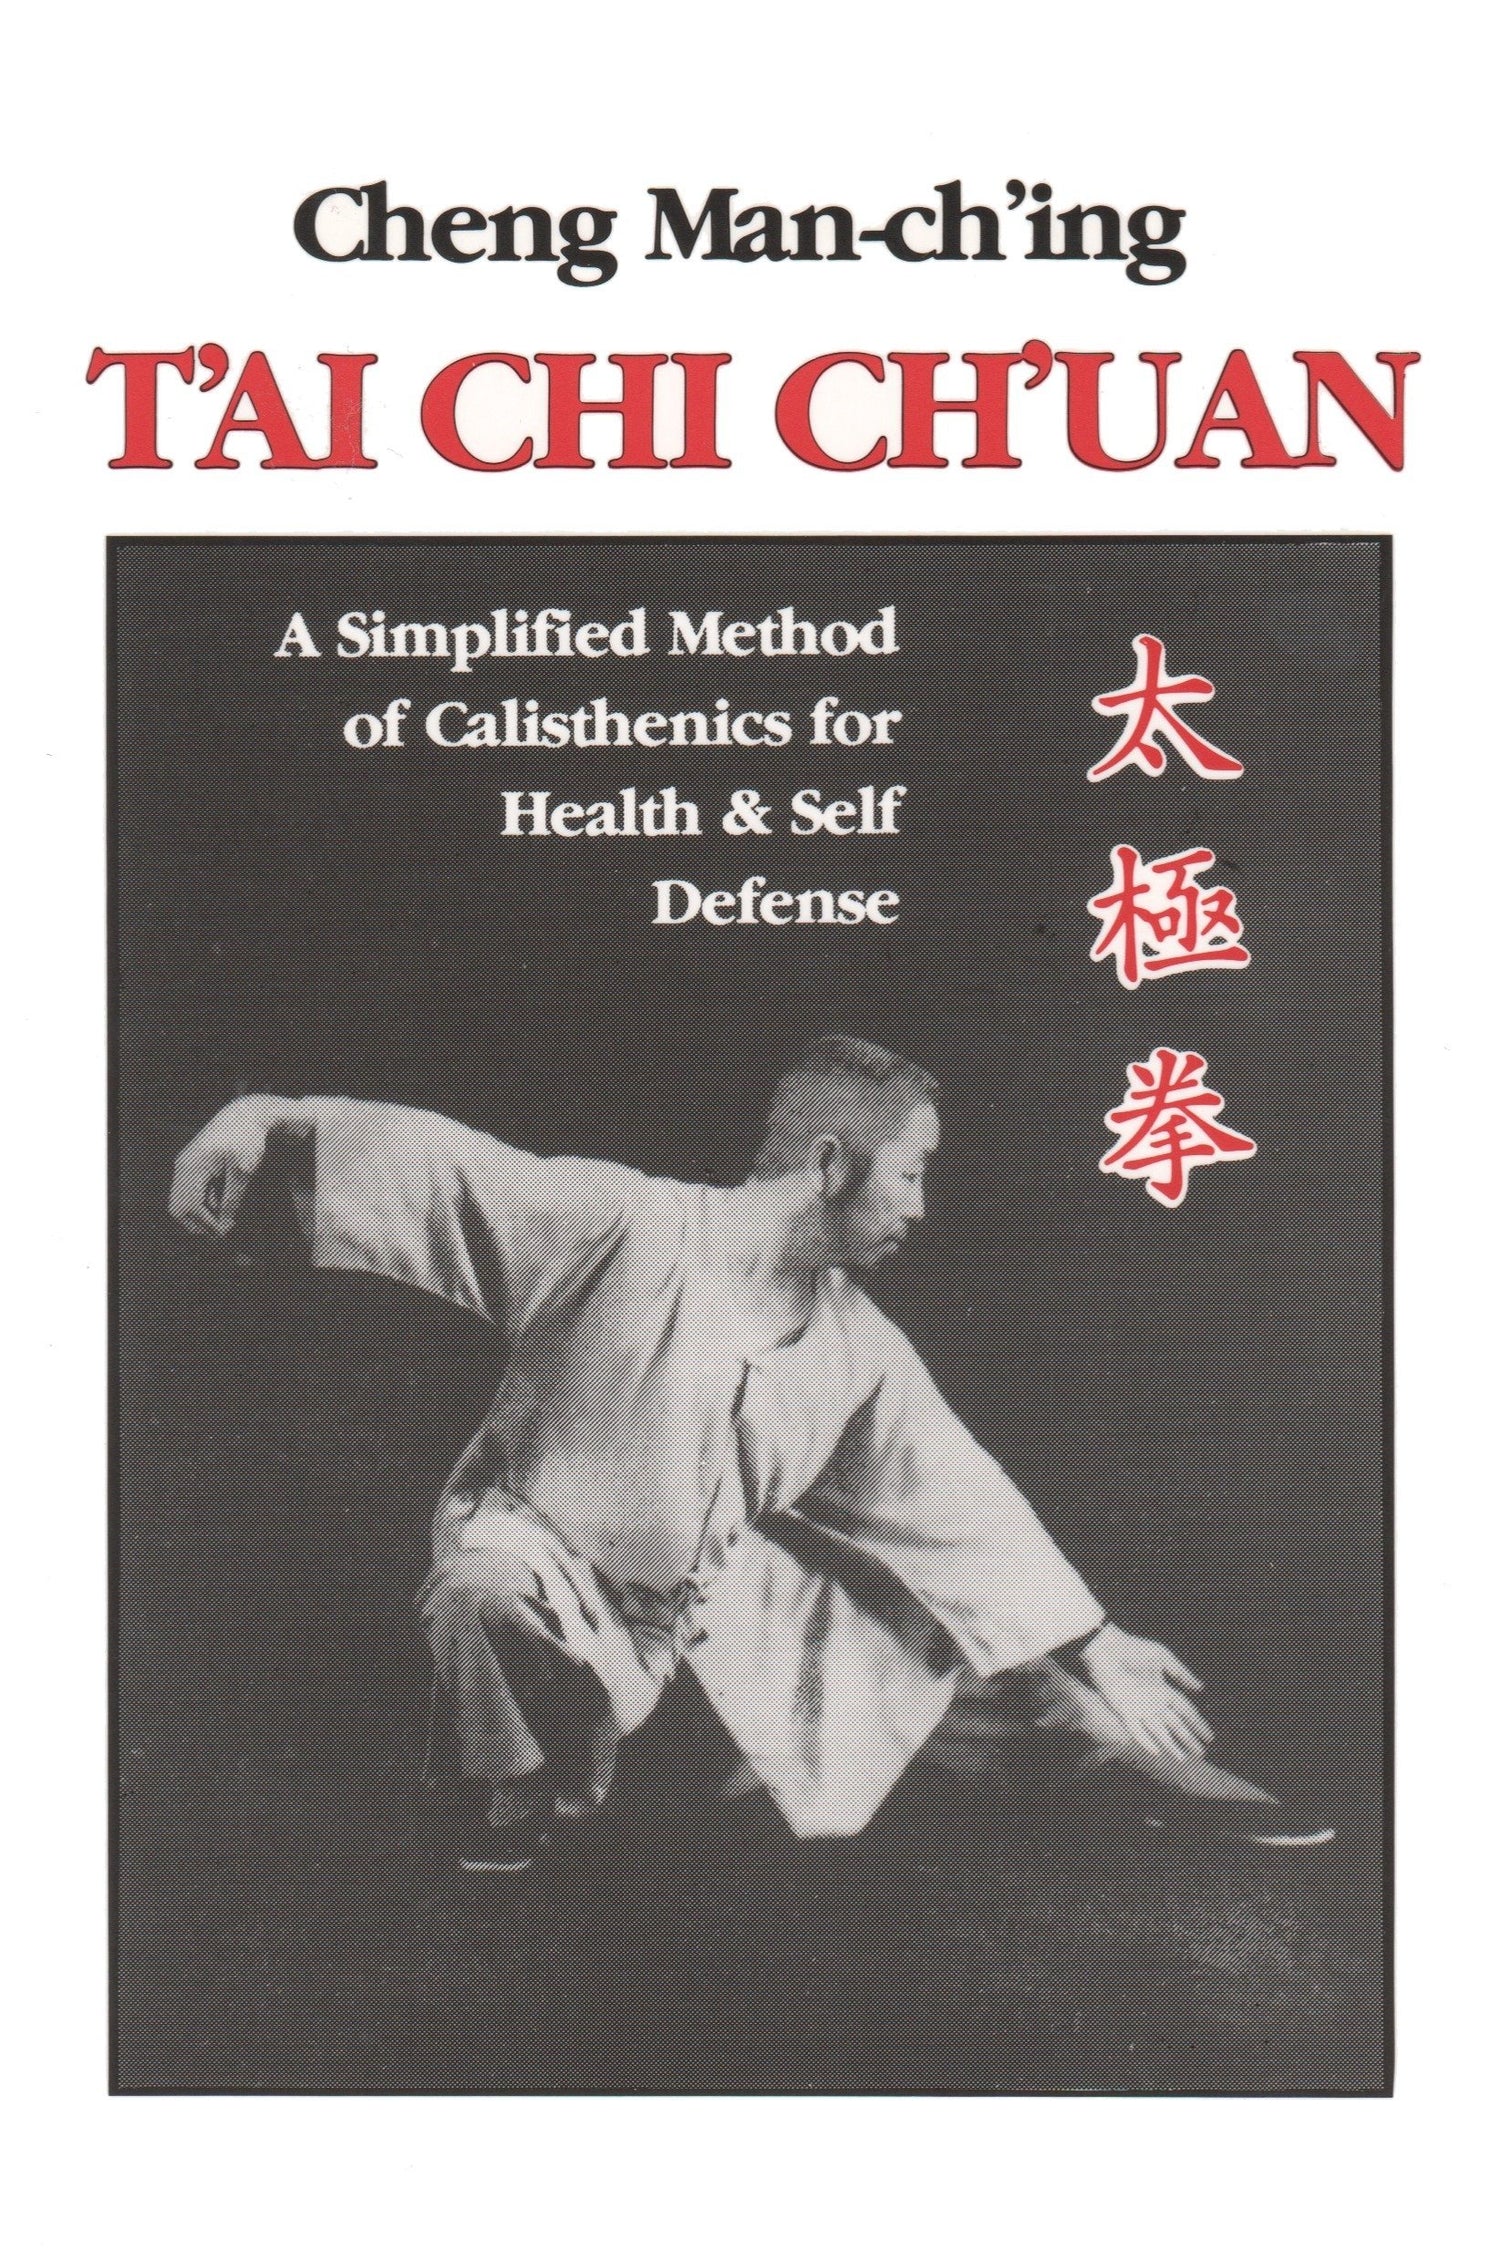 Tai Chi Chuan: A Simplified Method of Calisthenics for Health & Self Defense Book by Cheng Man Ching (Preowned)